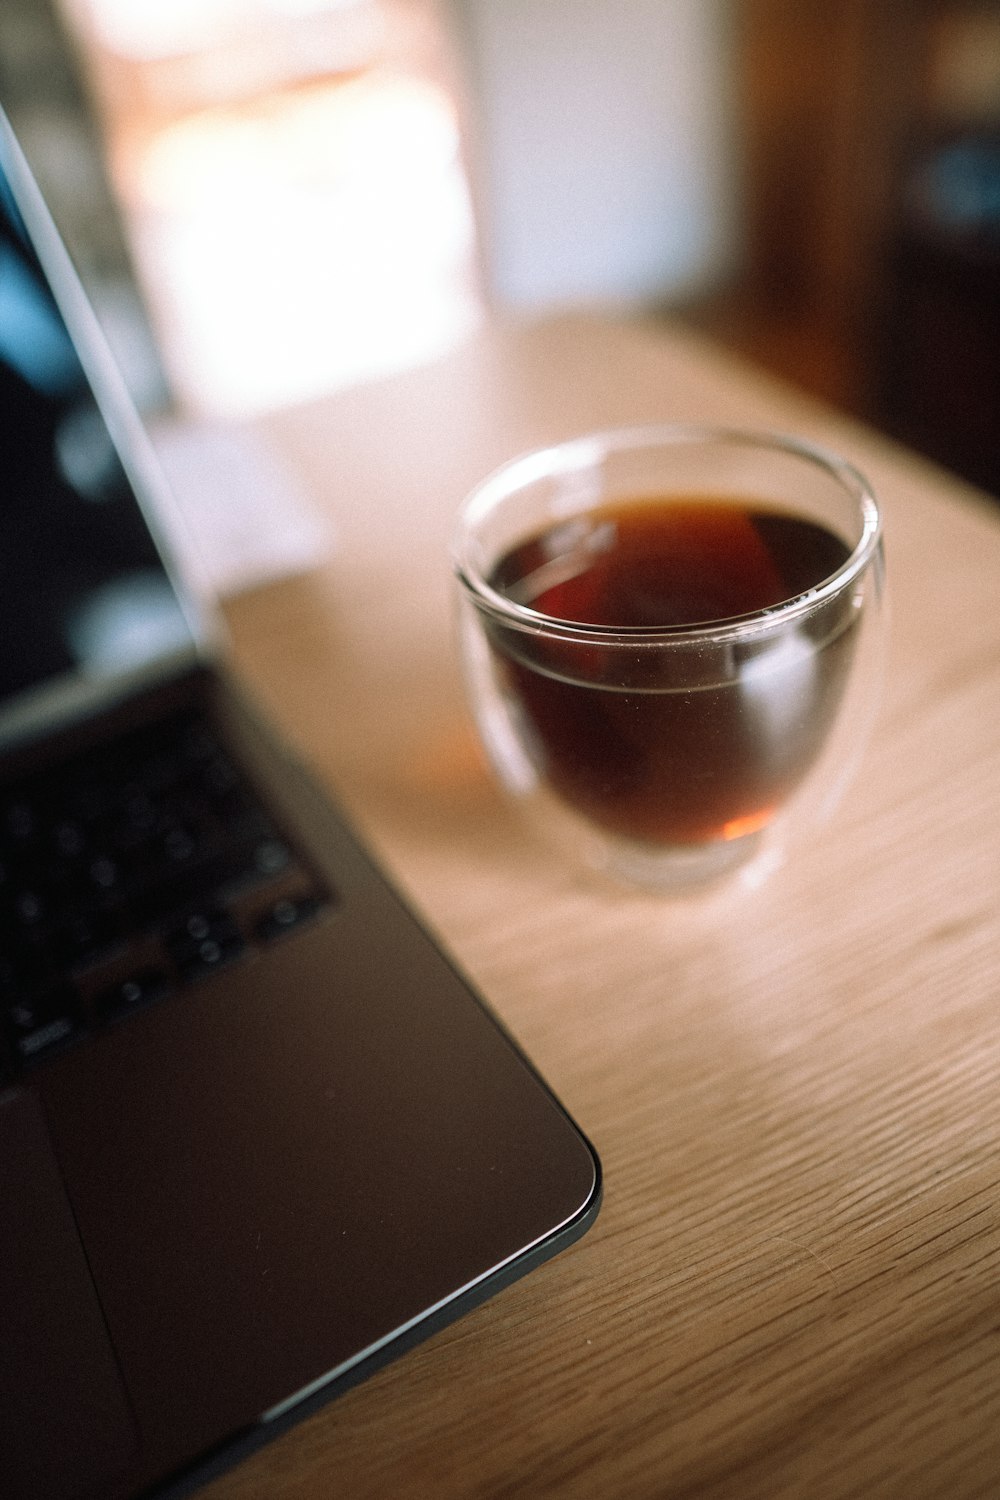 clear drinking glass beside black laptop computer